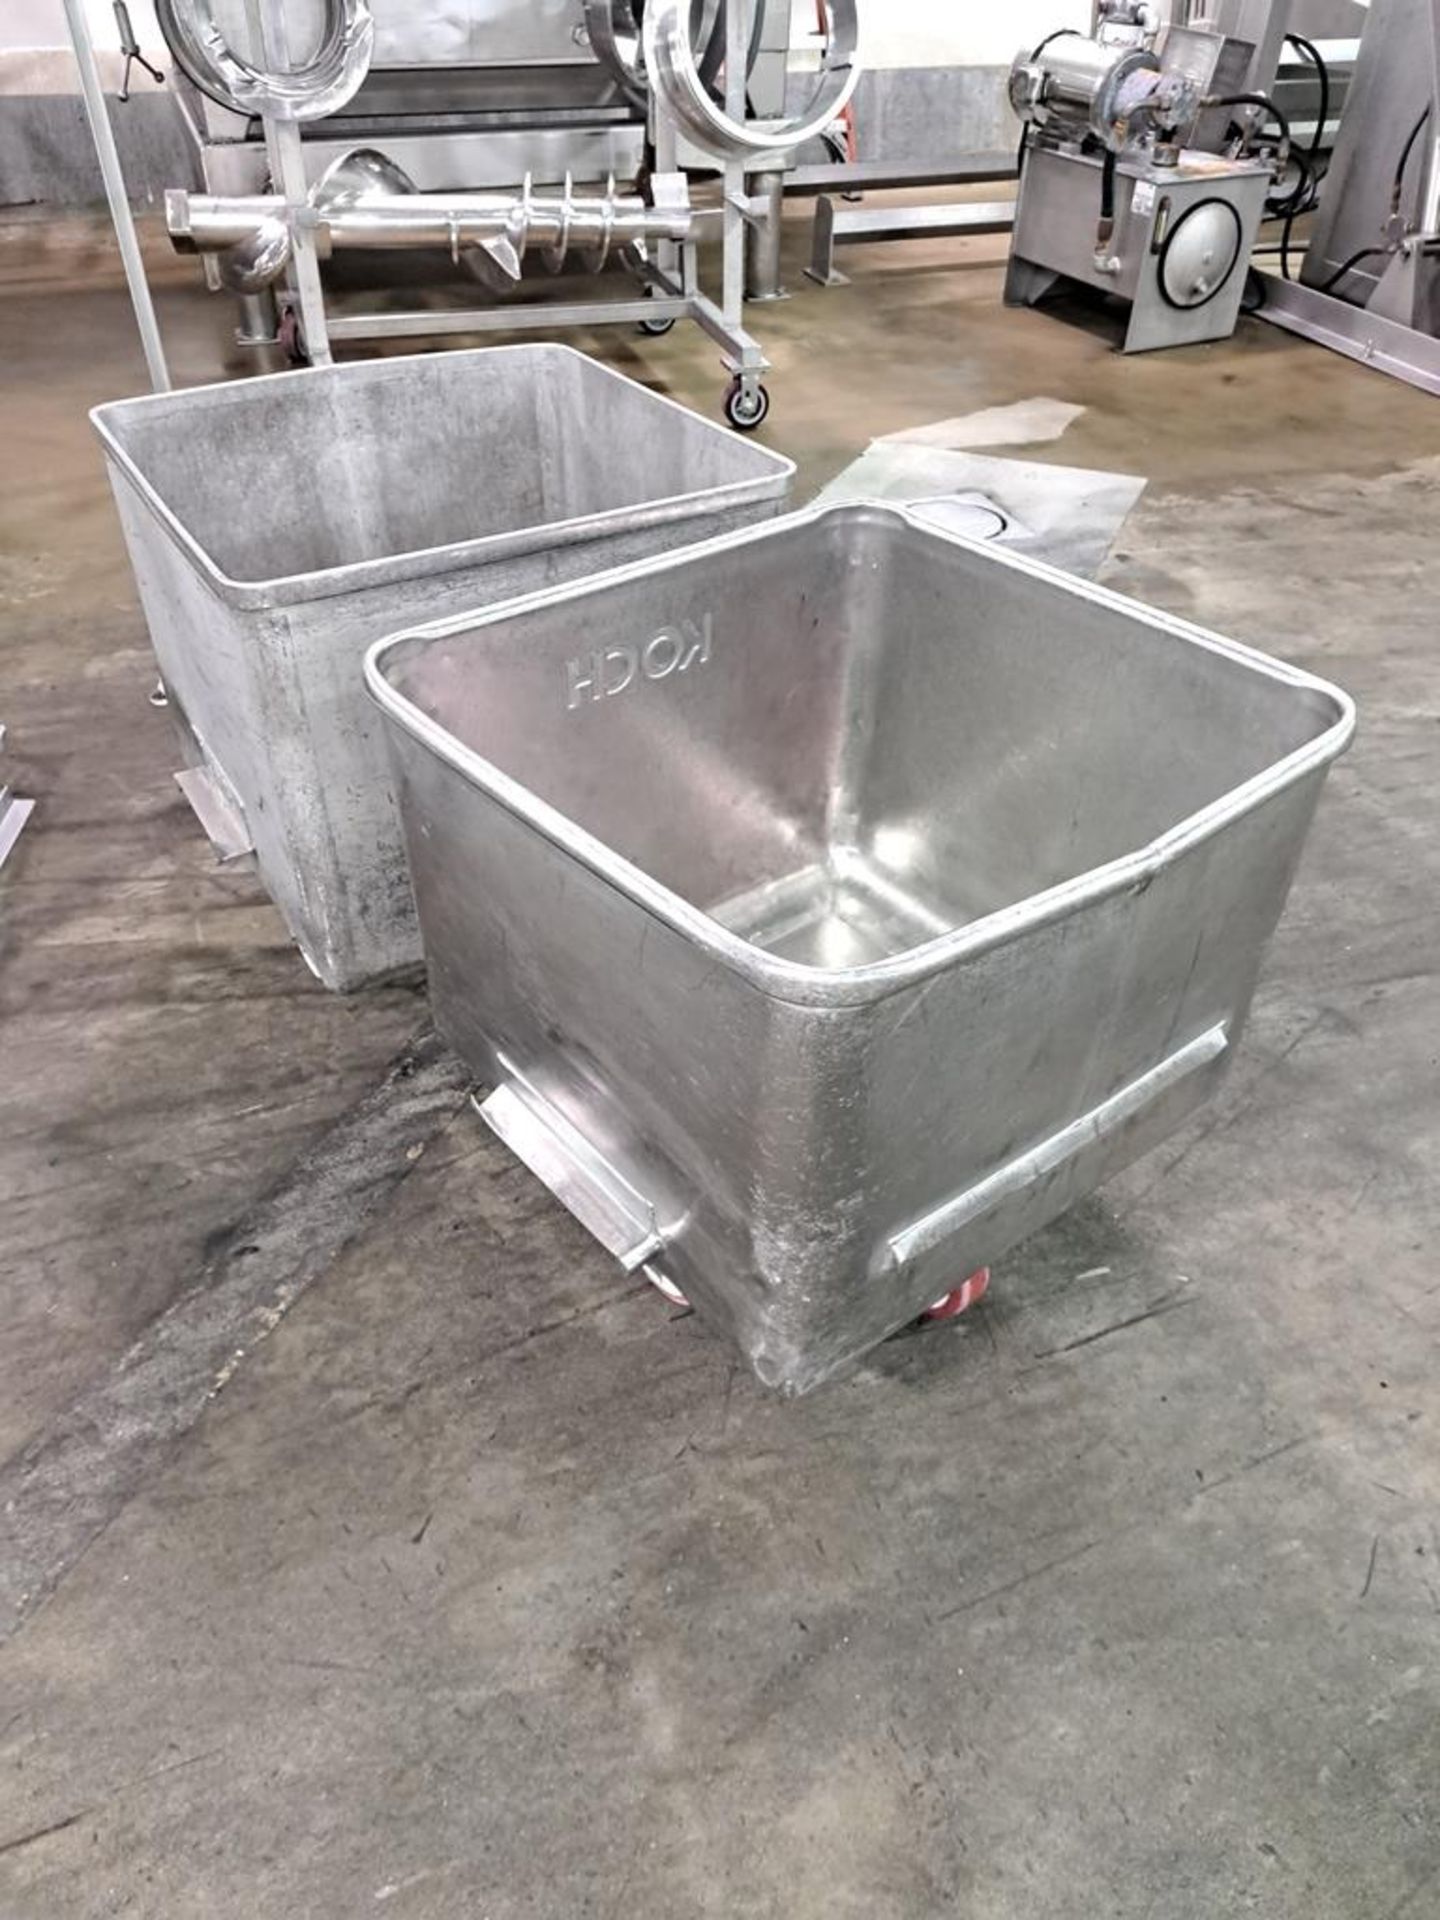 Stainless Steel Dump Buggies, 400 Lb. capacity (Located in Bolingbrook, IL)(Loading Fee $50.00-